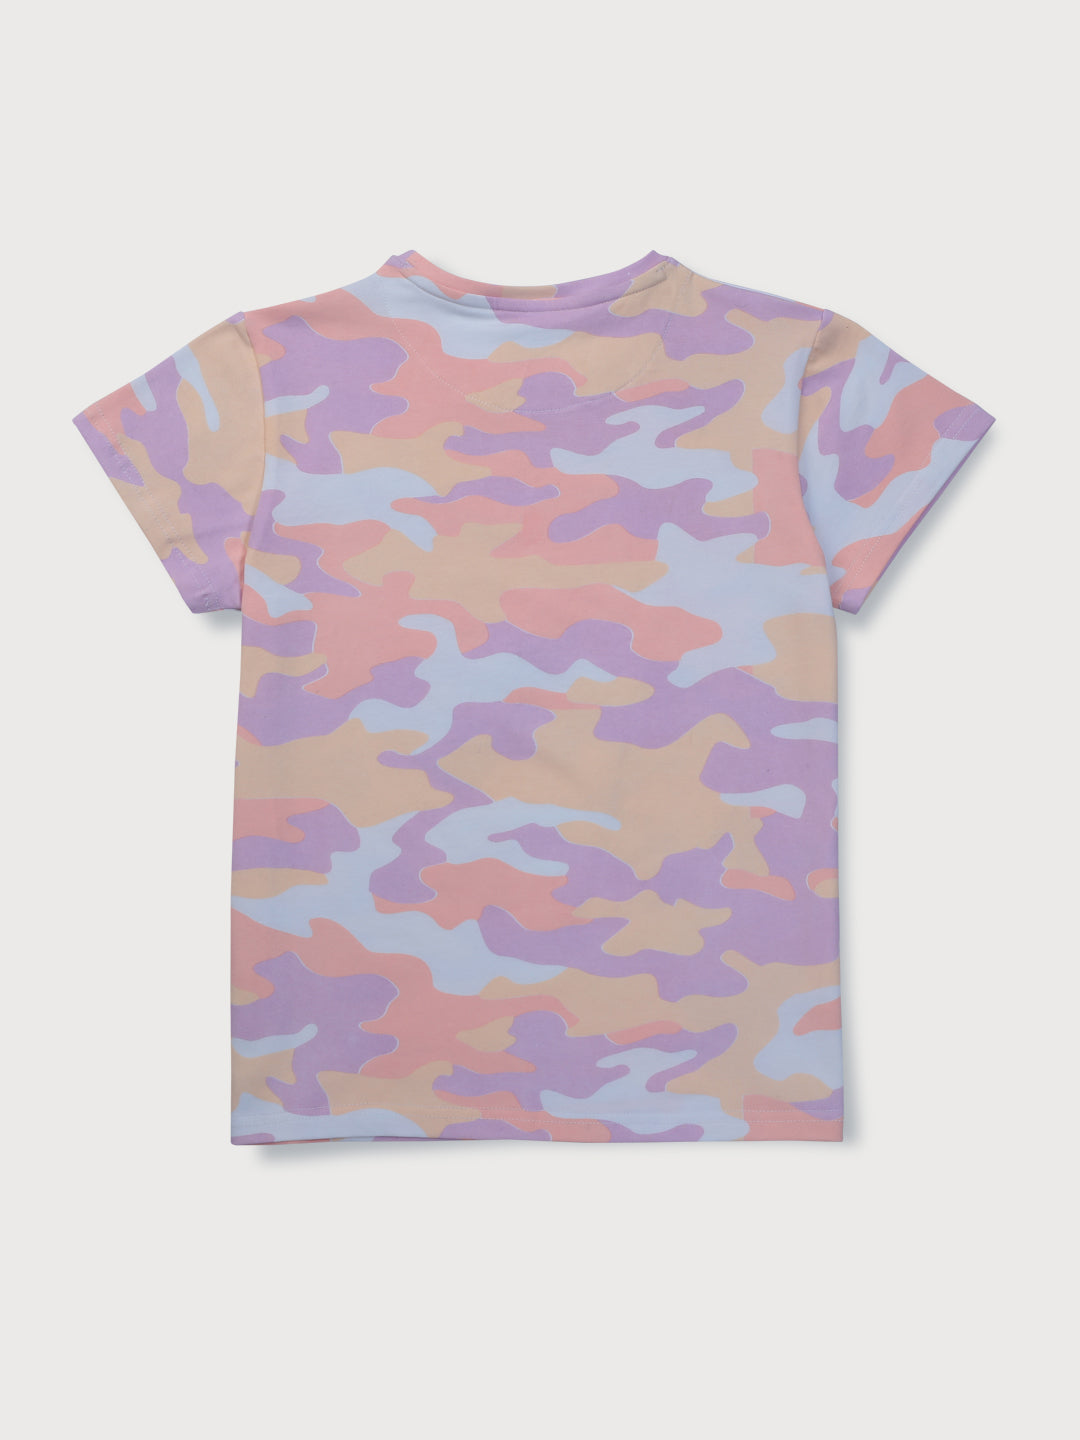 Girls Pink Camouflage Knits Knits Top